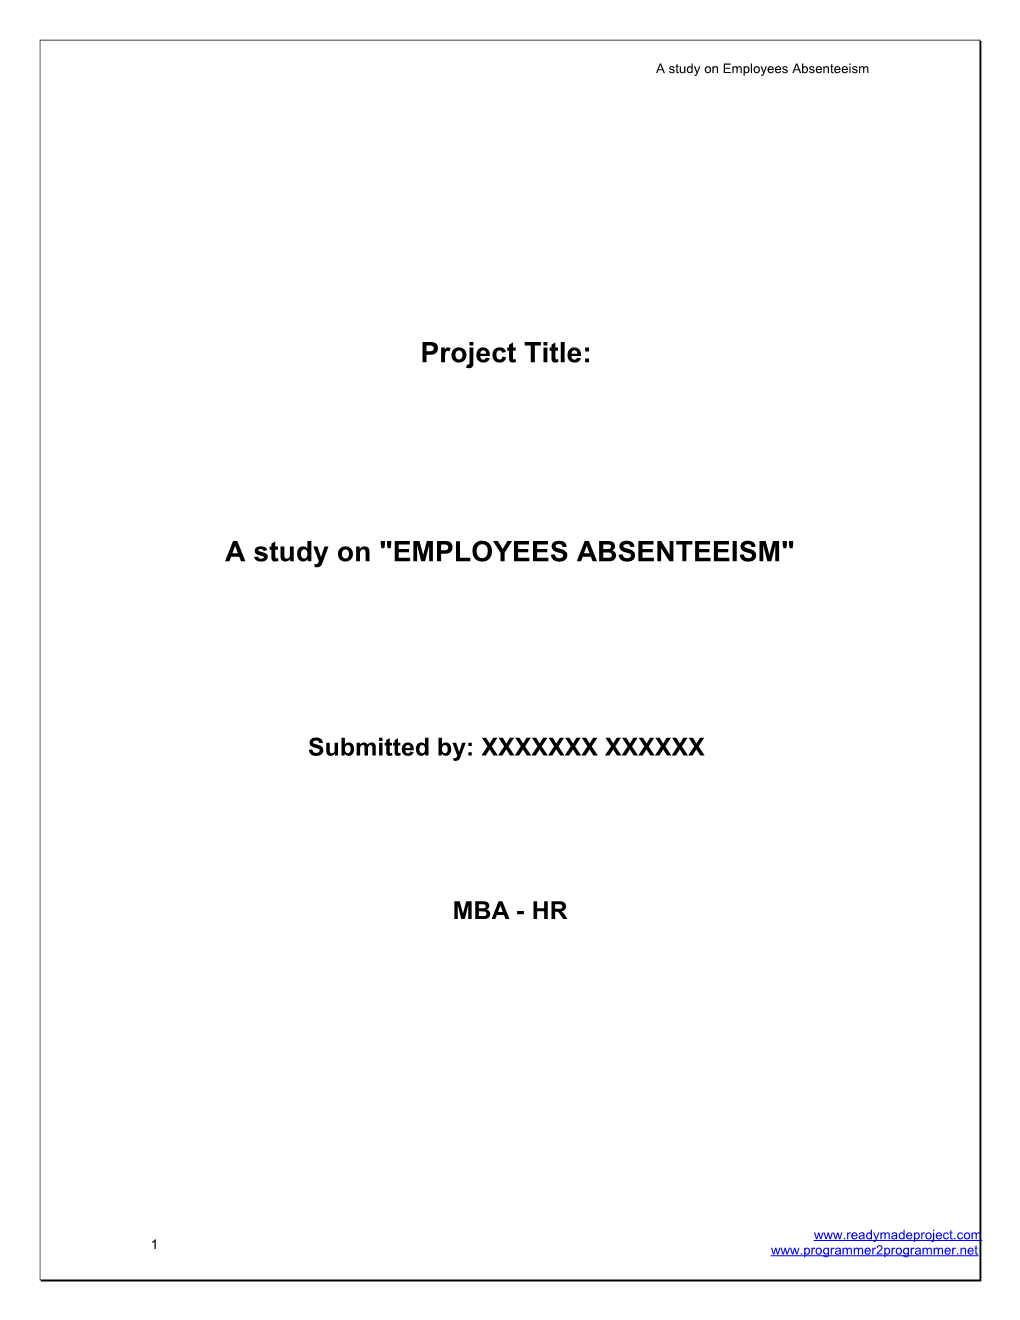 A Study on Employees Absenteeism